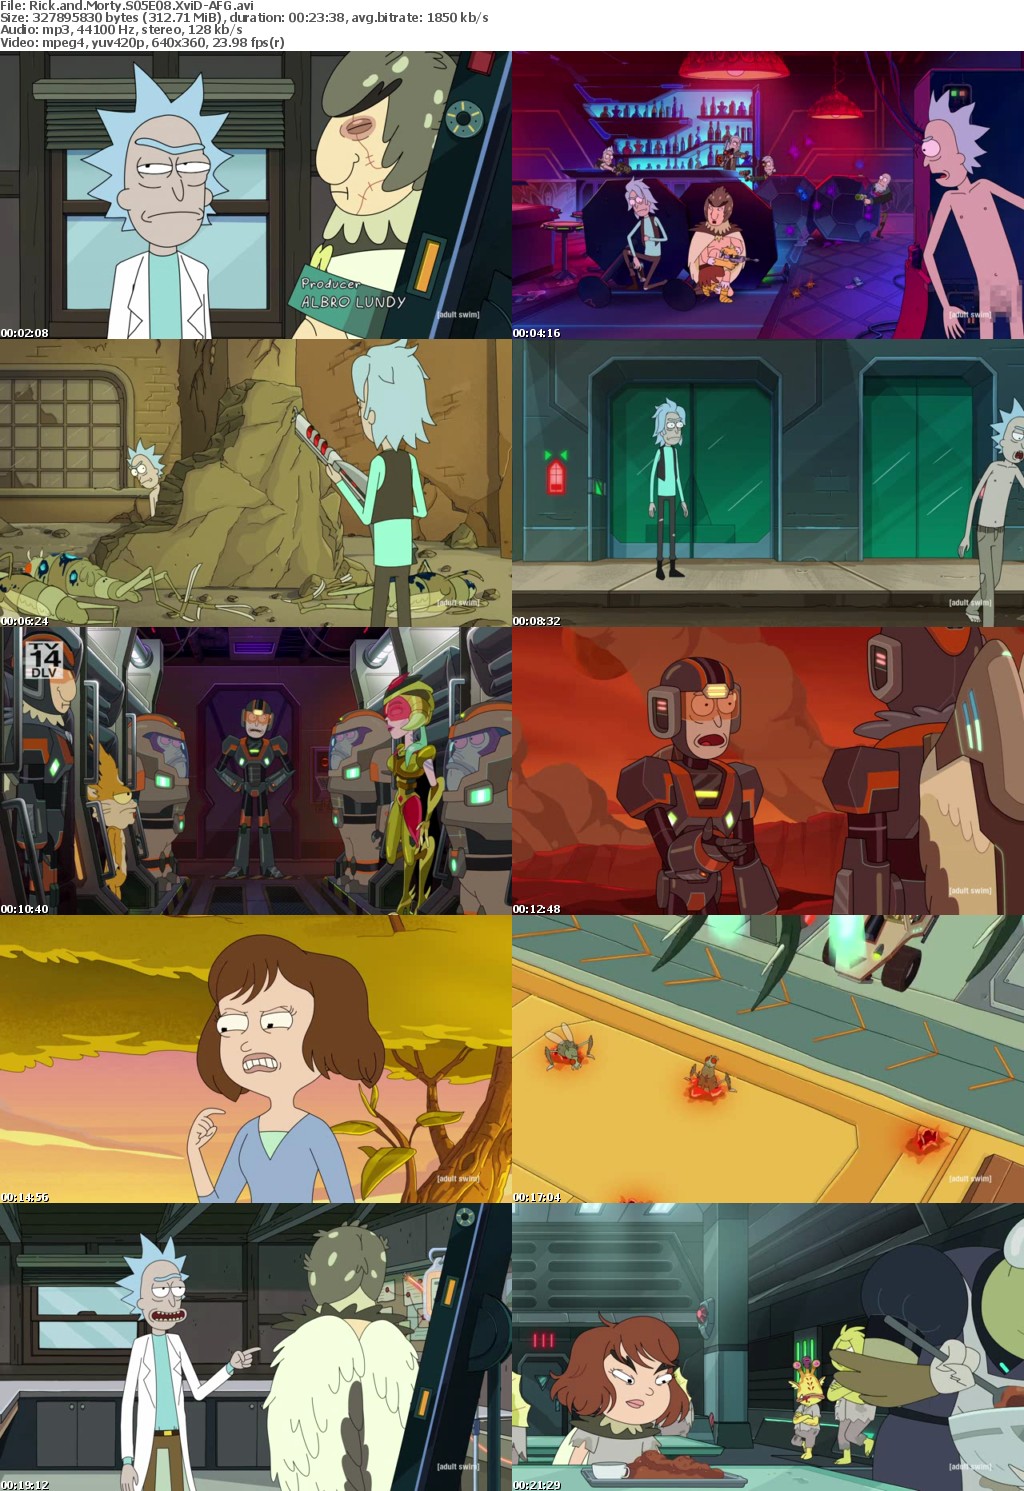 Rick and Morty S05E08 XviD-AFG